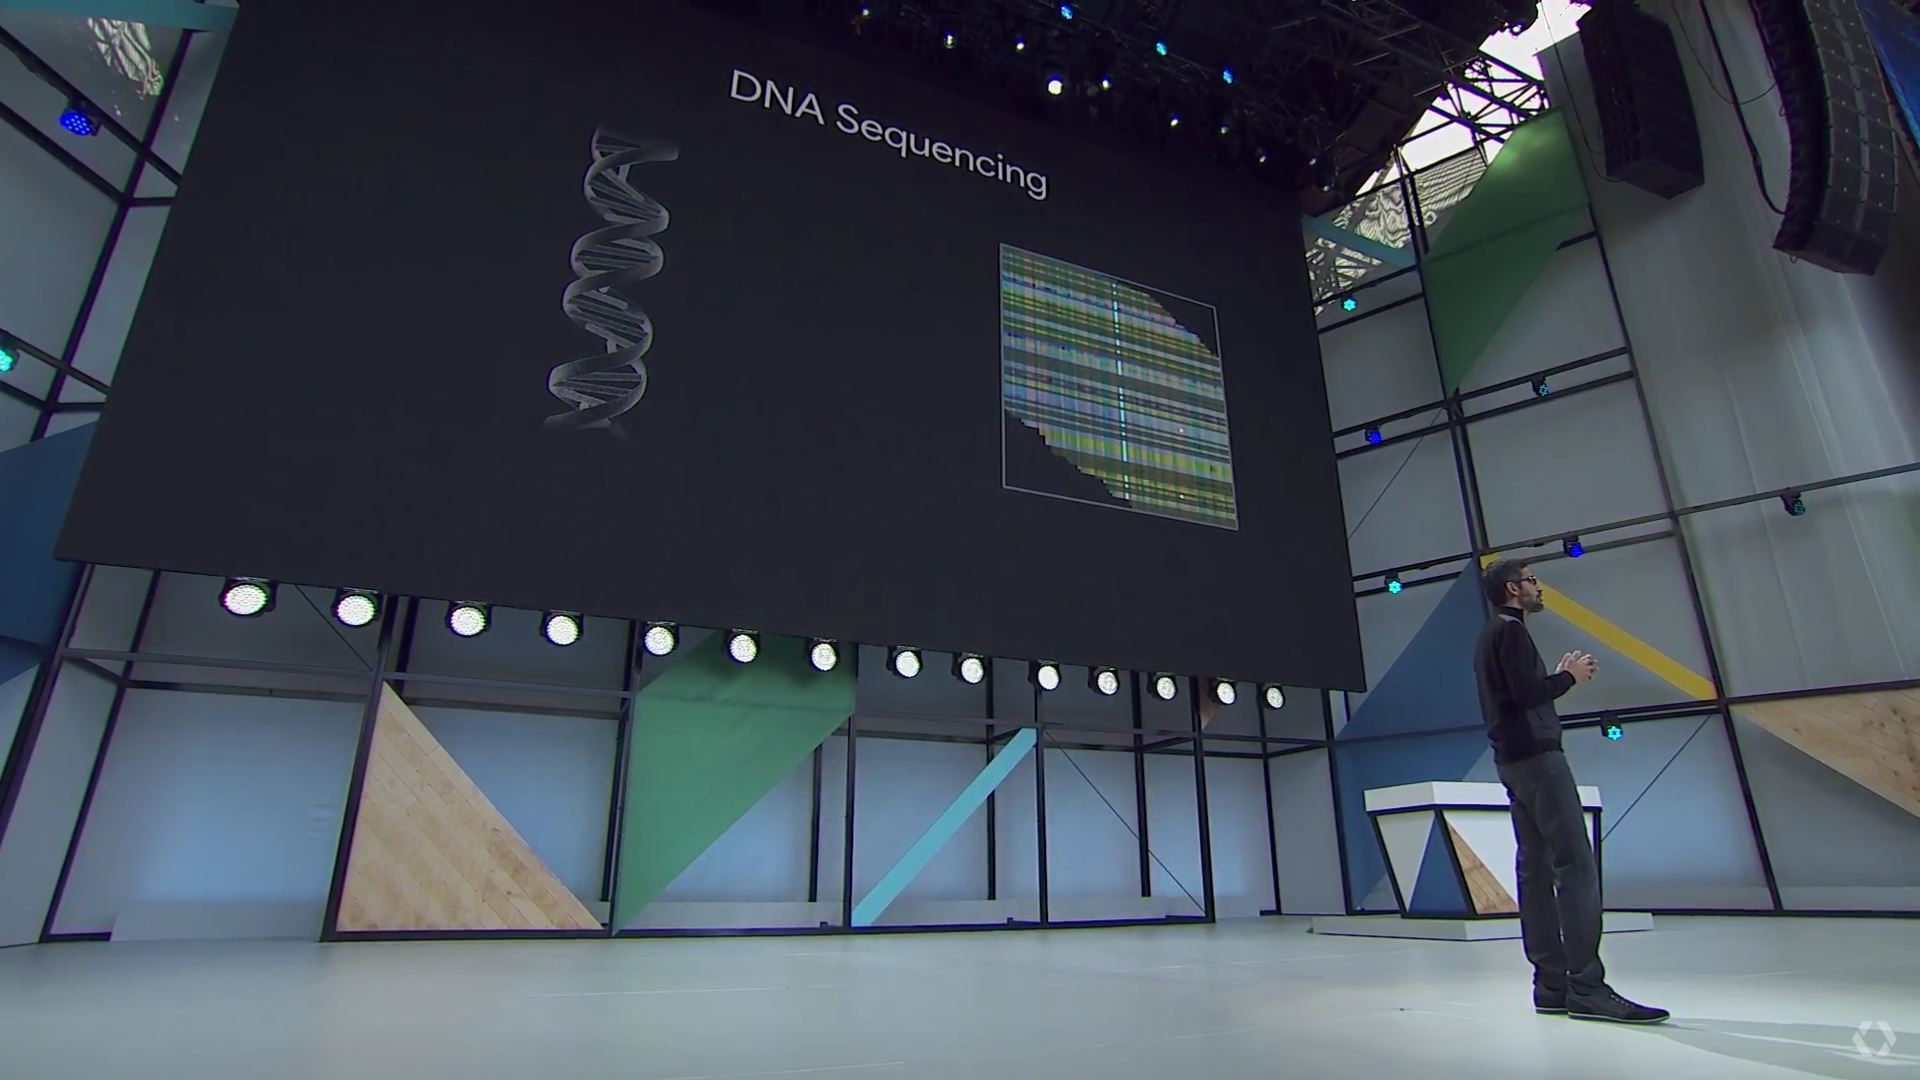 DNA sequencing deep learning slide at Google IO